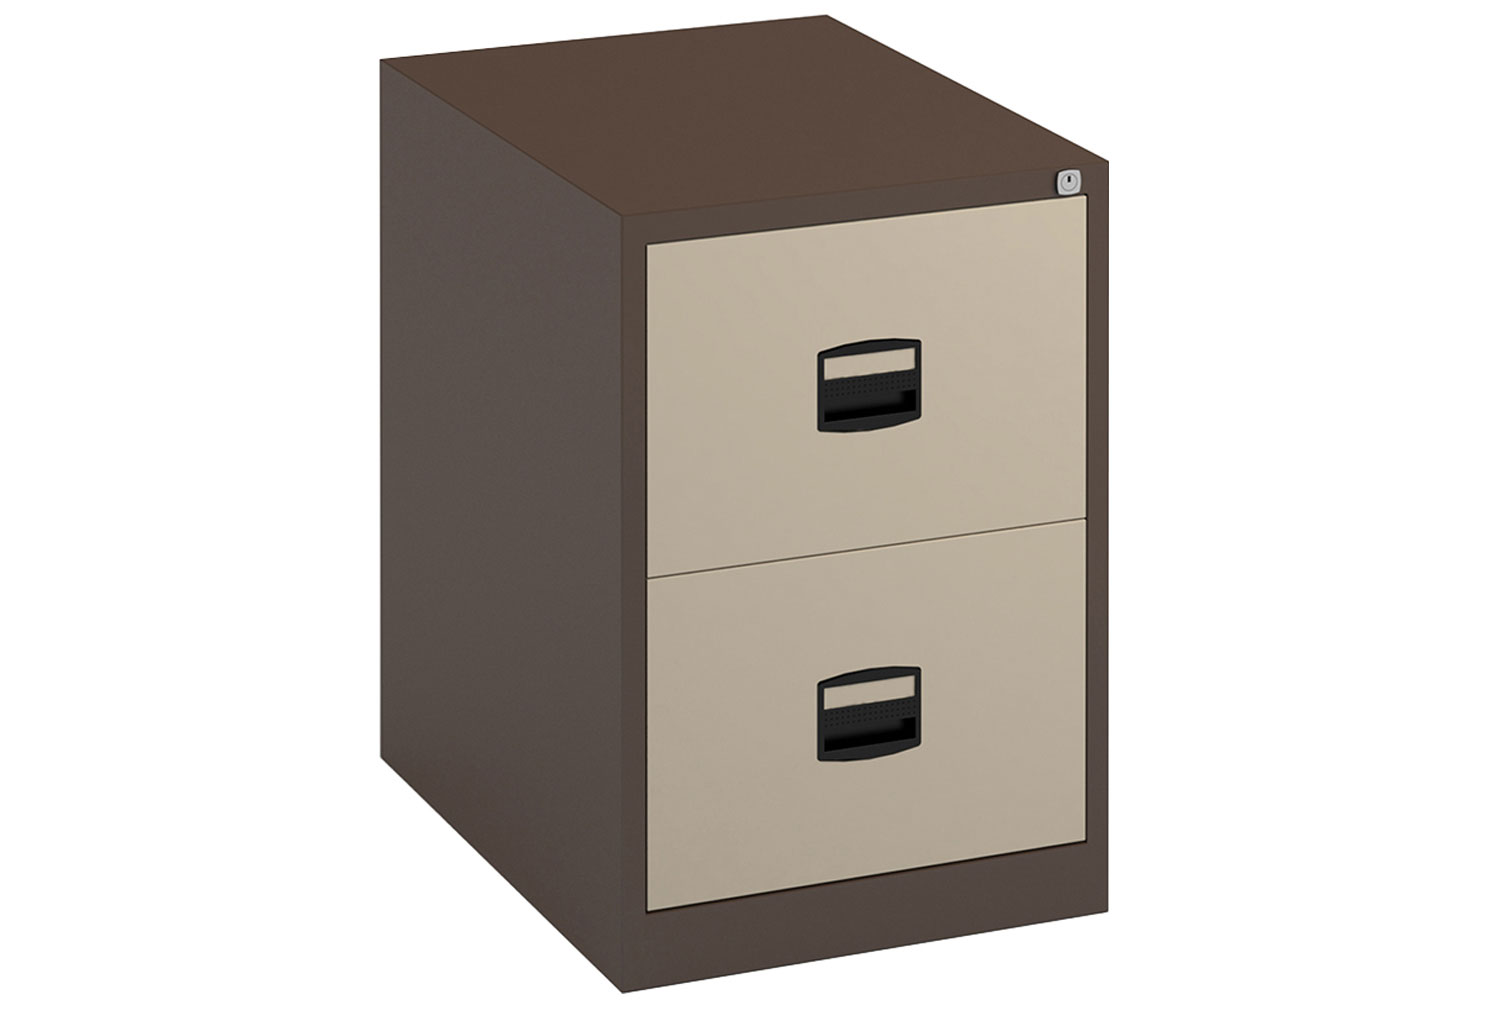 Bisley Economy Filing Cabinet (Central Handle), 2 Drawer - 47wx62dx71h (cm), Coffee/Cream